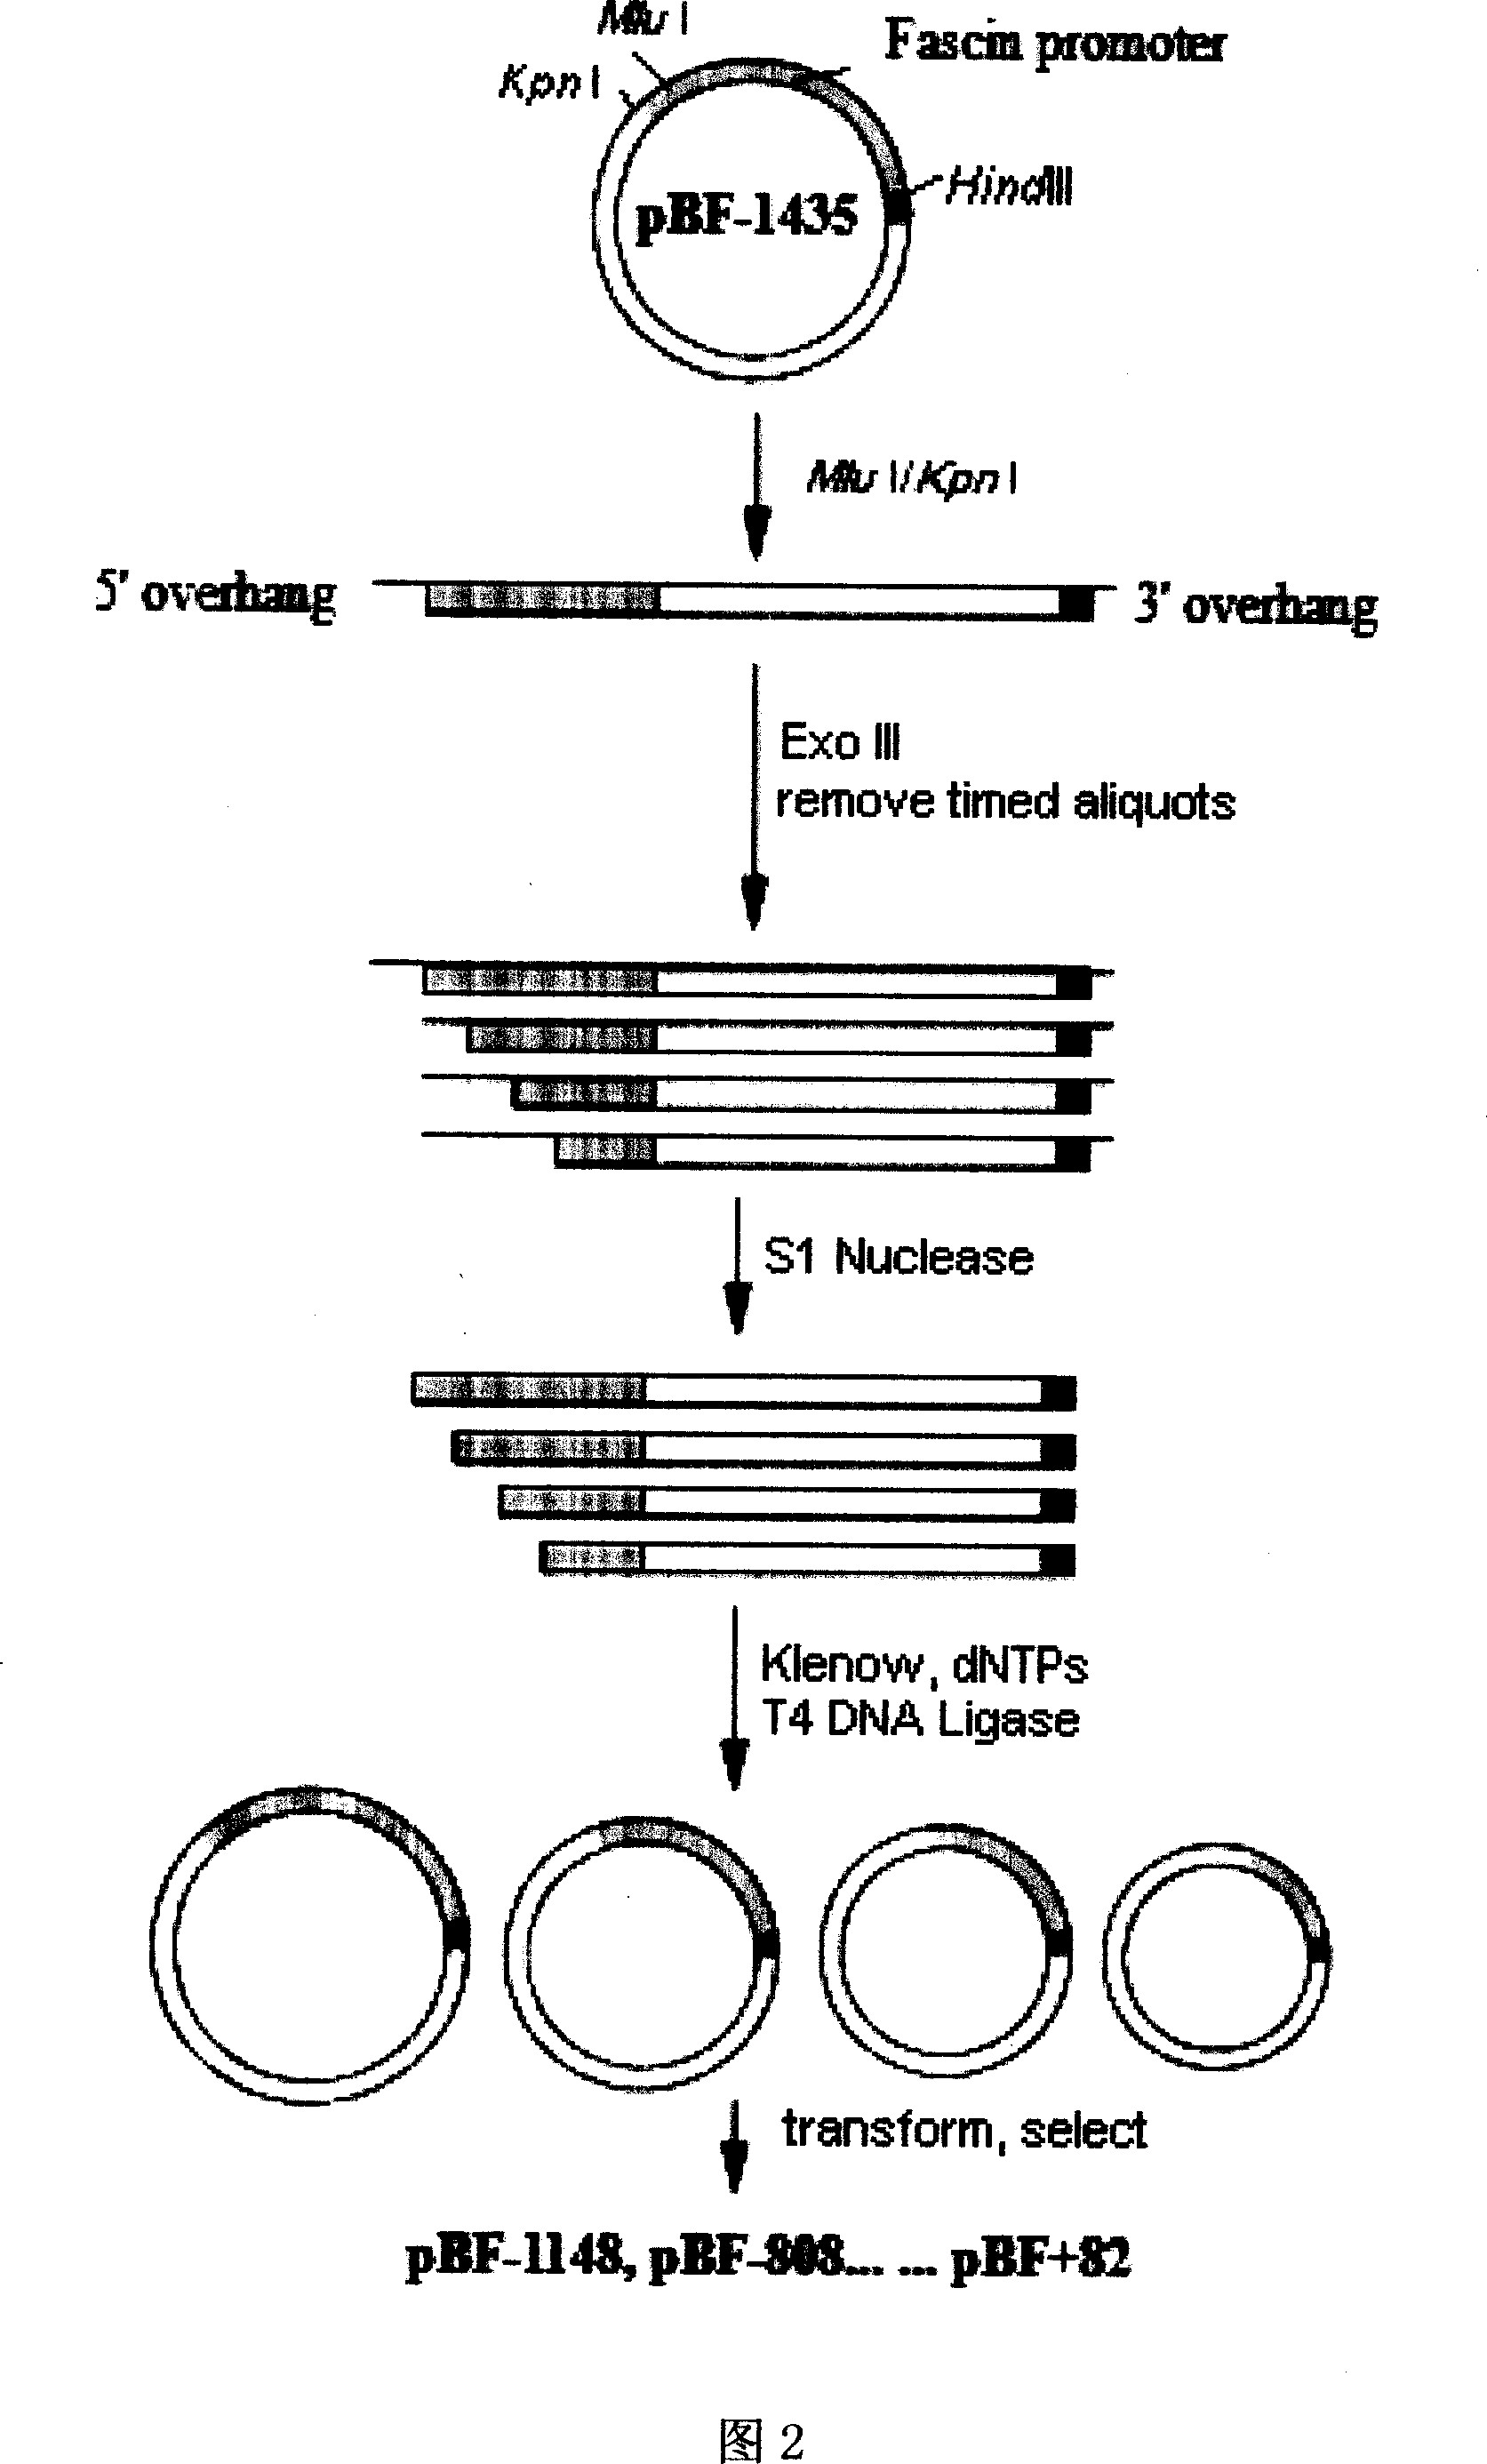 Controlling element for human esophagus cancer cell Fascin gene promoter region